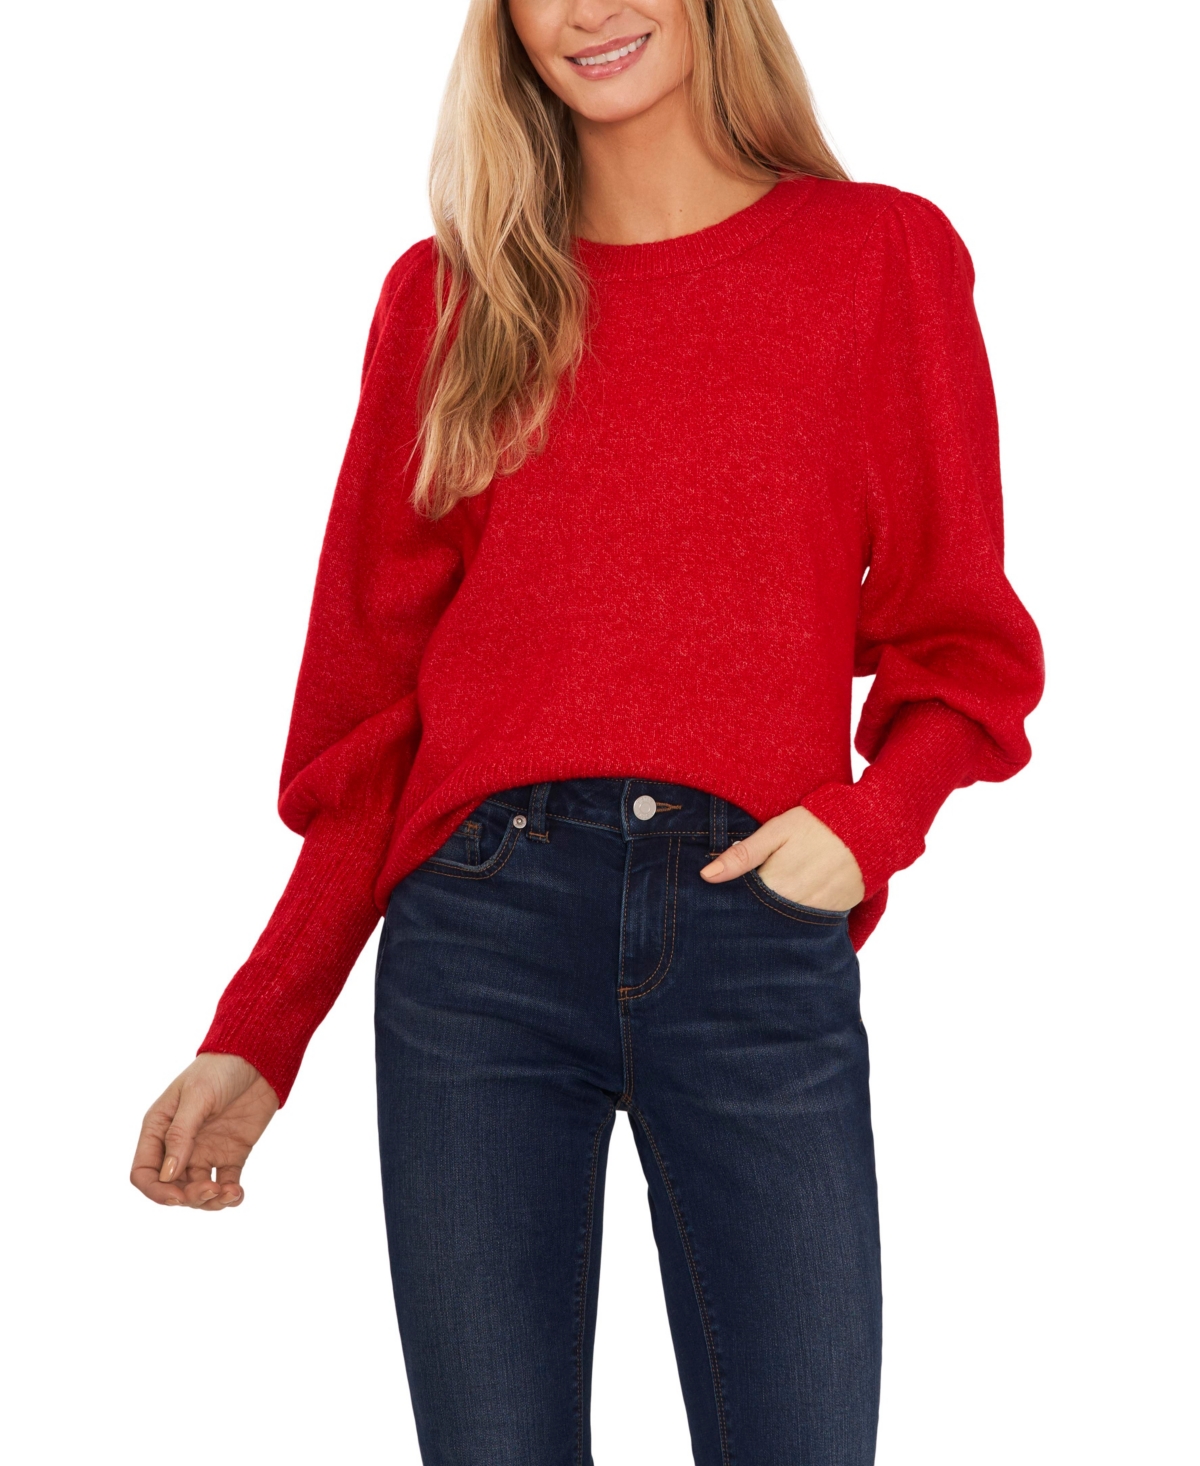 Edwardian Blouses |  Lace Blouses, Sweaters, Vests CeCe Womens Puff Long Sleeve Crew Neck Sweater - Luminous Red $34.50 AT vintagedancer.com